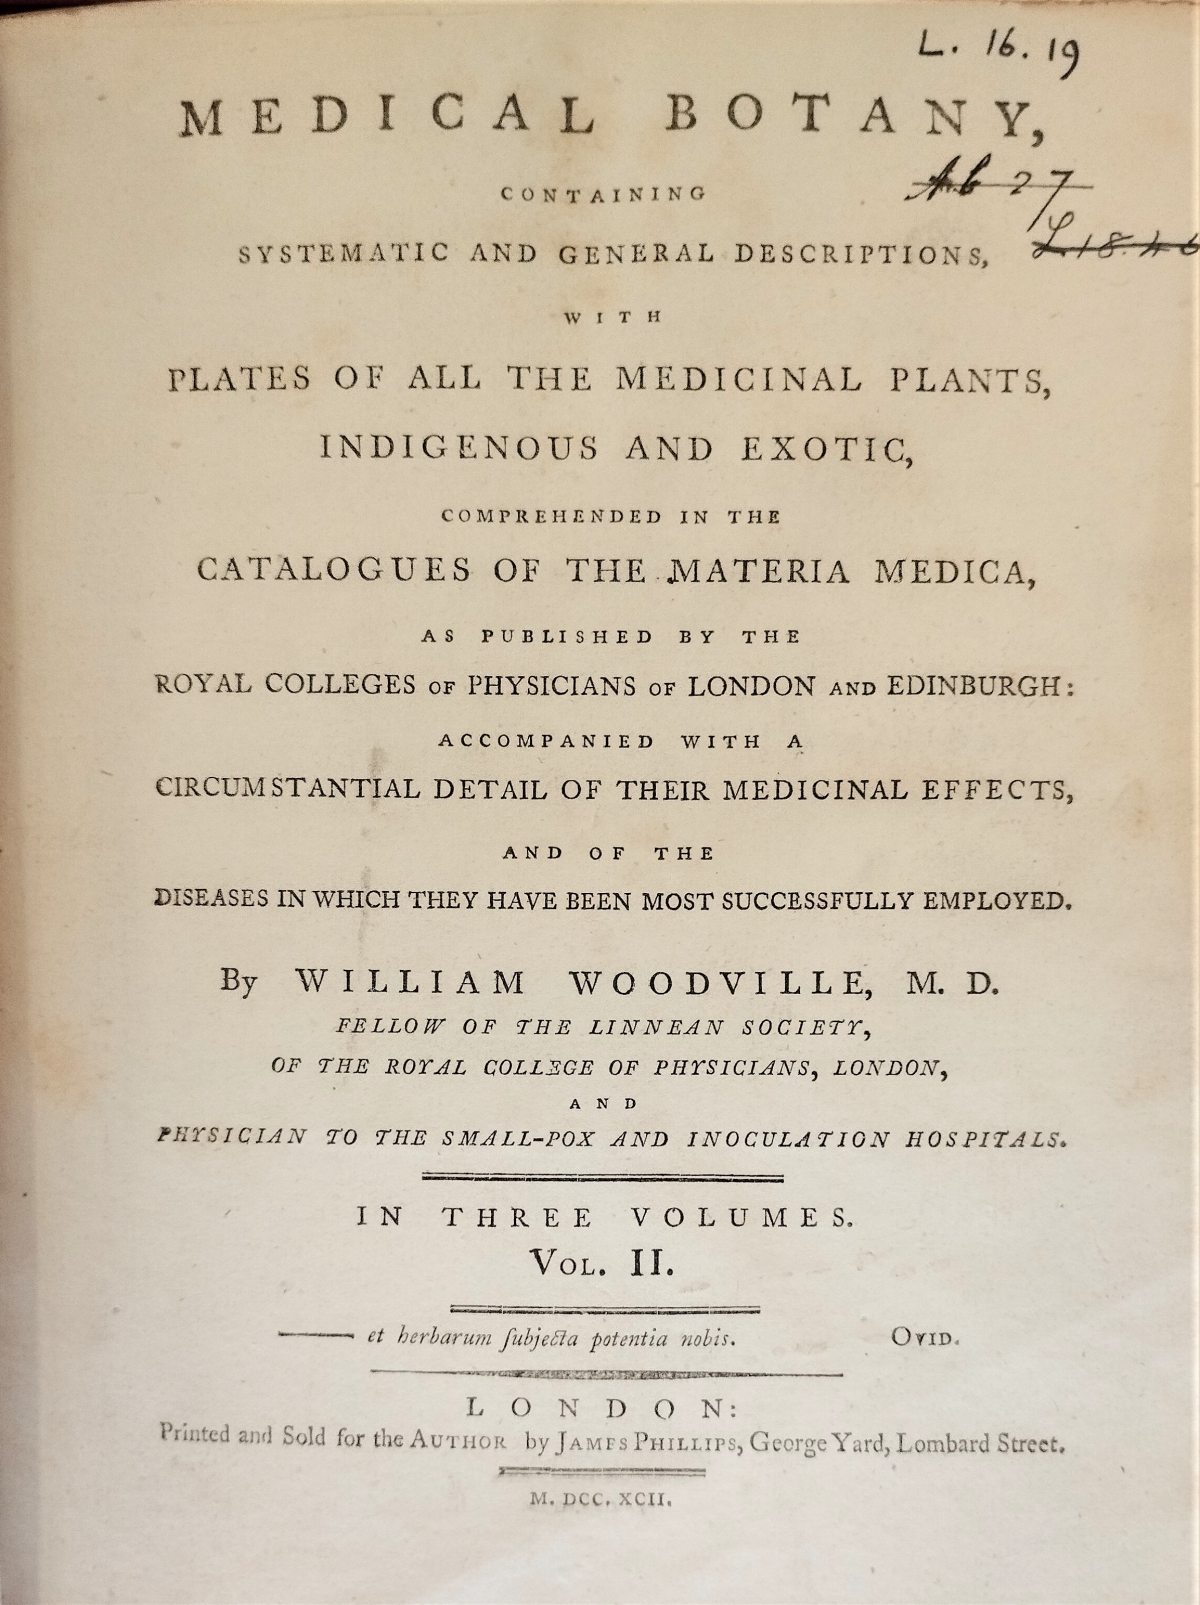 Title page of the book "Medical botany" by William Woodville (170-1793).